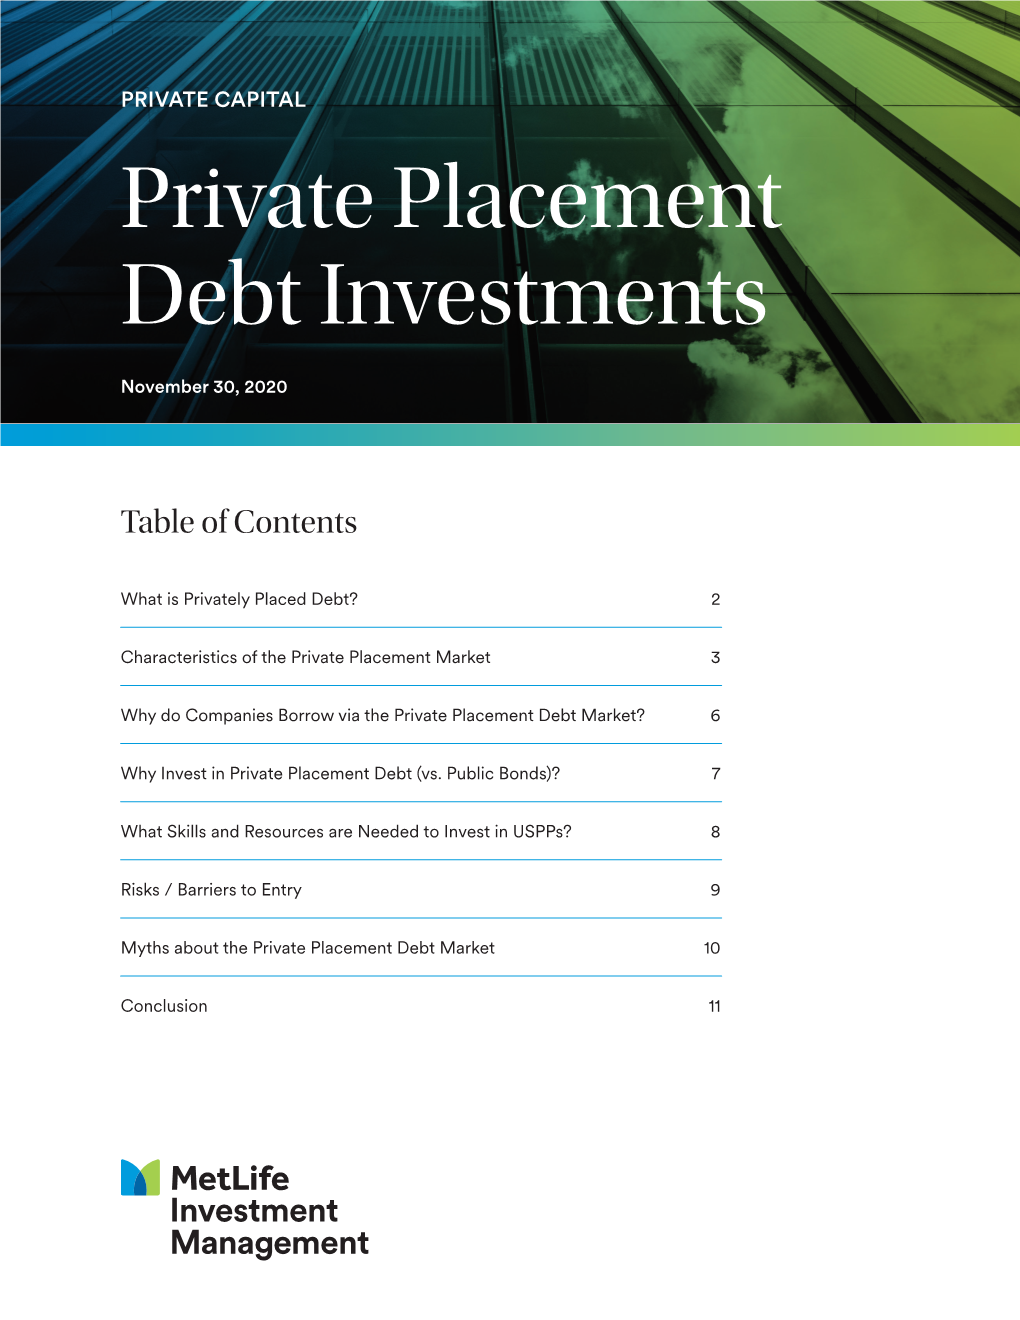 Private Placement Debt Investments